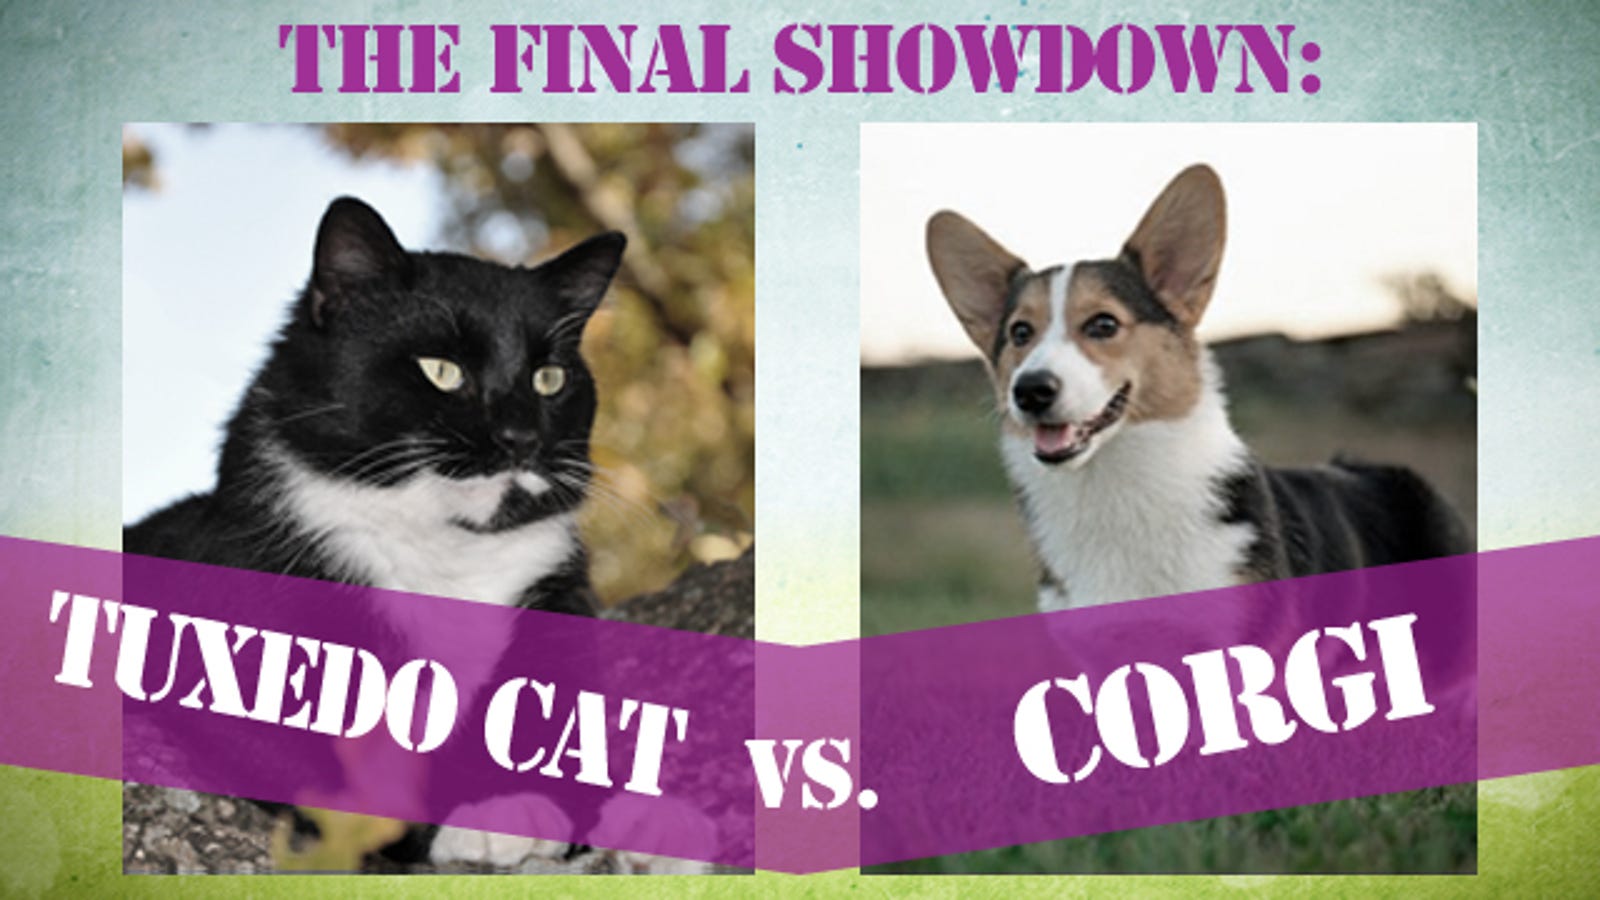 Cats vs. Dogs Judgment Day Has Arrived